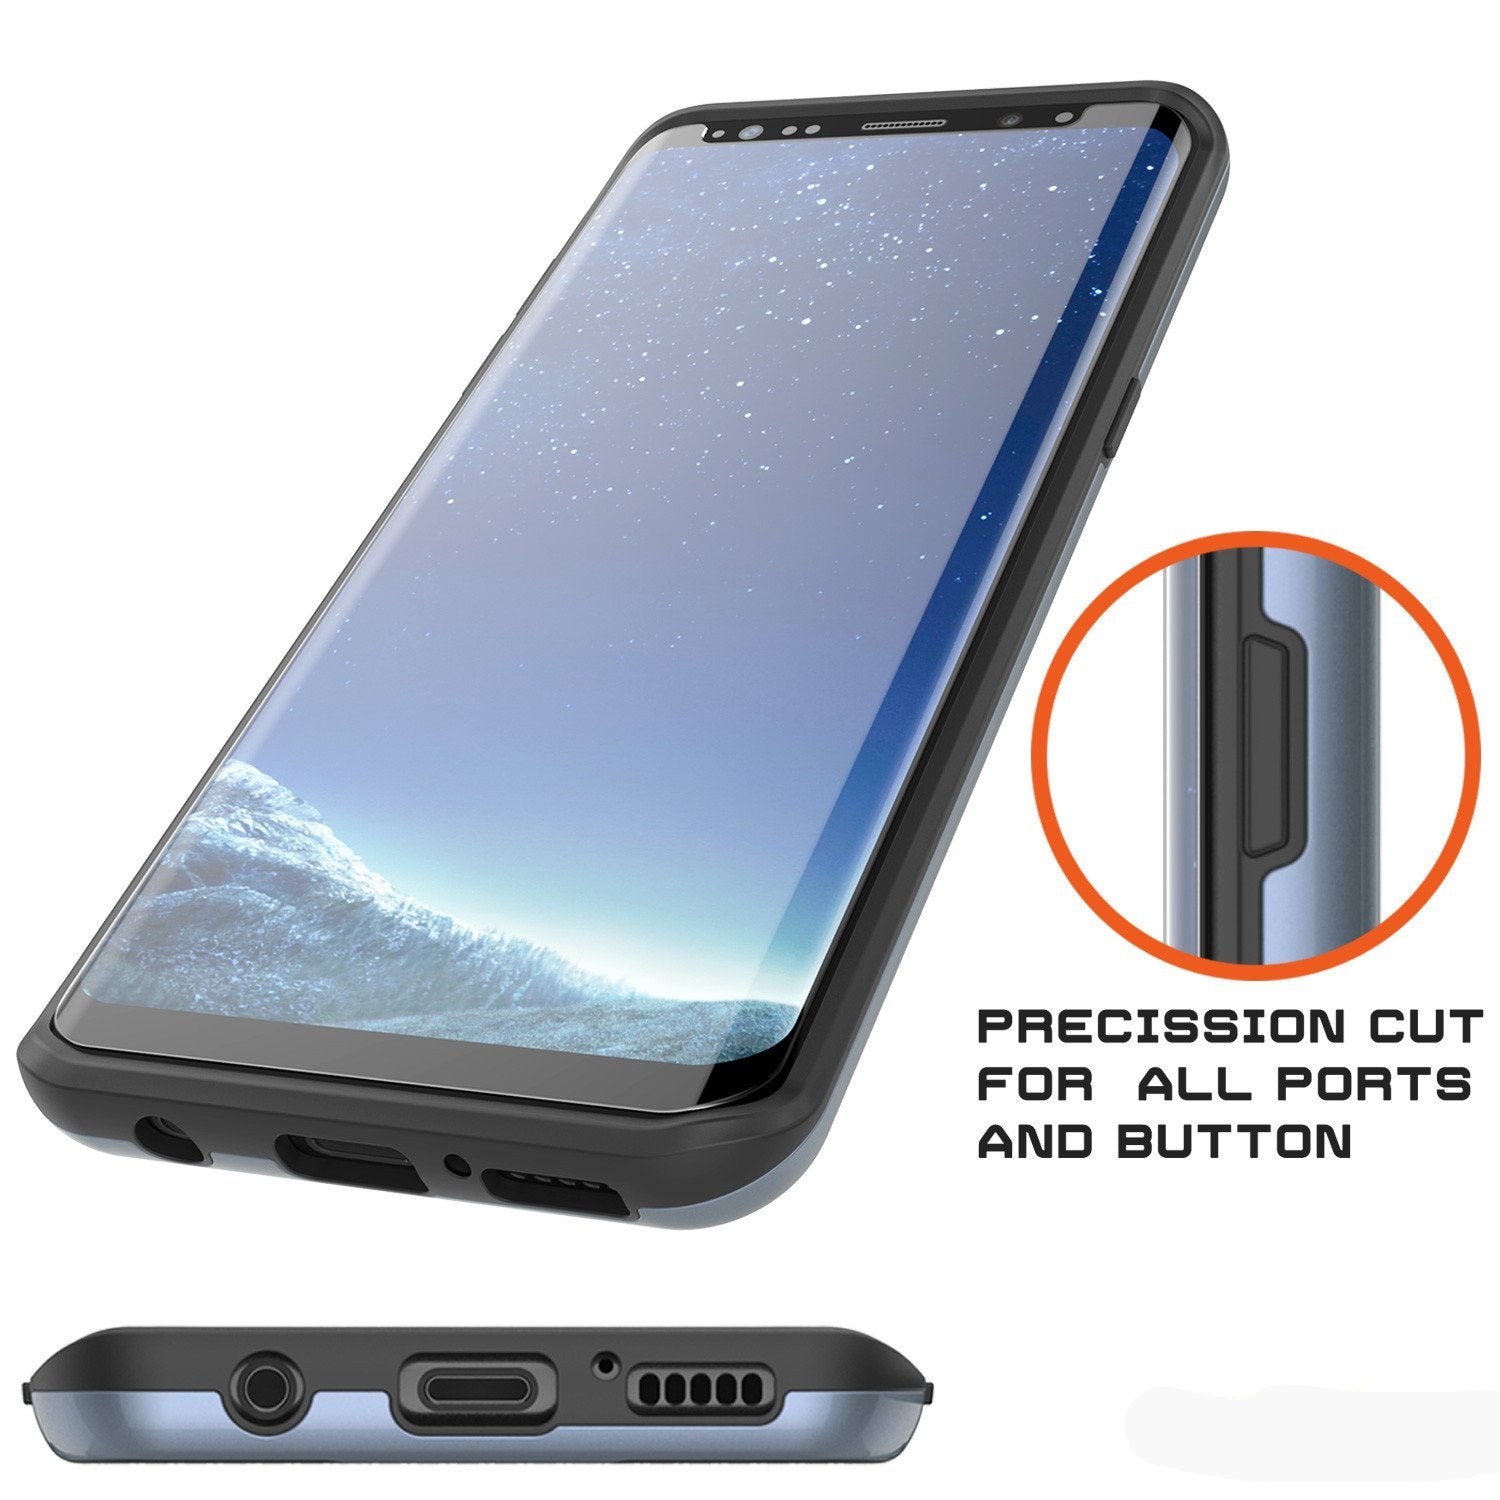 Galaxy S8 Case, PUNKcase [SLOT Series] Dual-Layer Armor Cover w/Integrated Anti-Shock System, Credit Card Slot & Screen Protector [Navy]